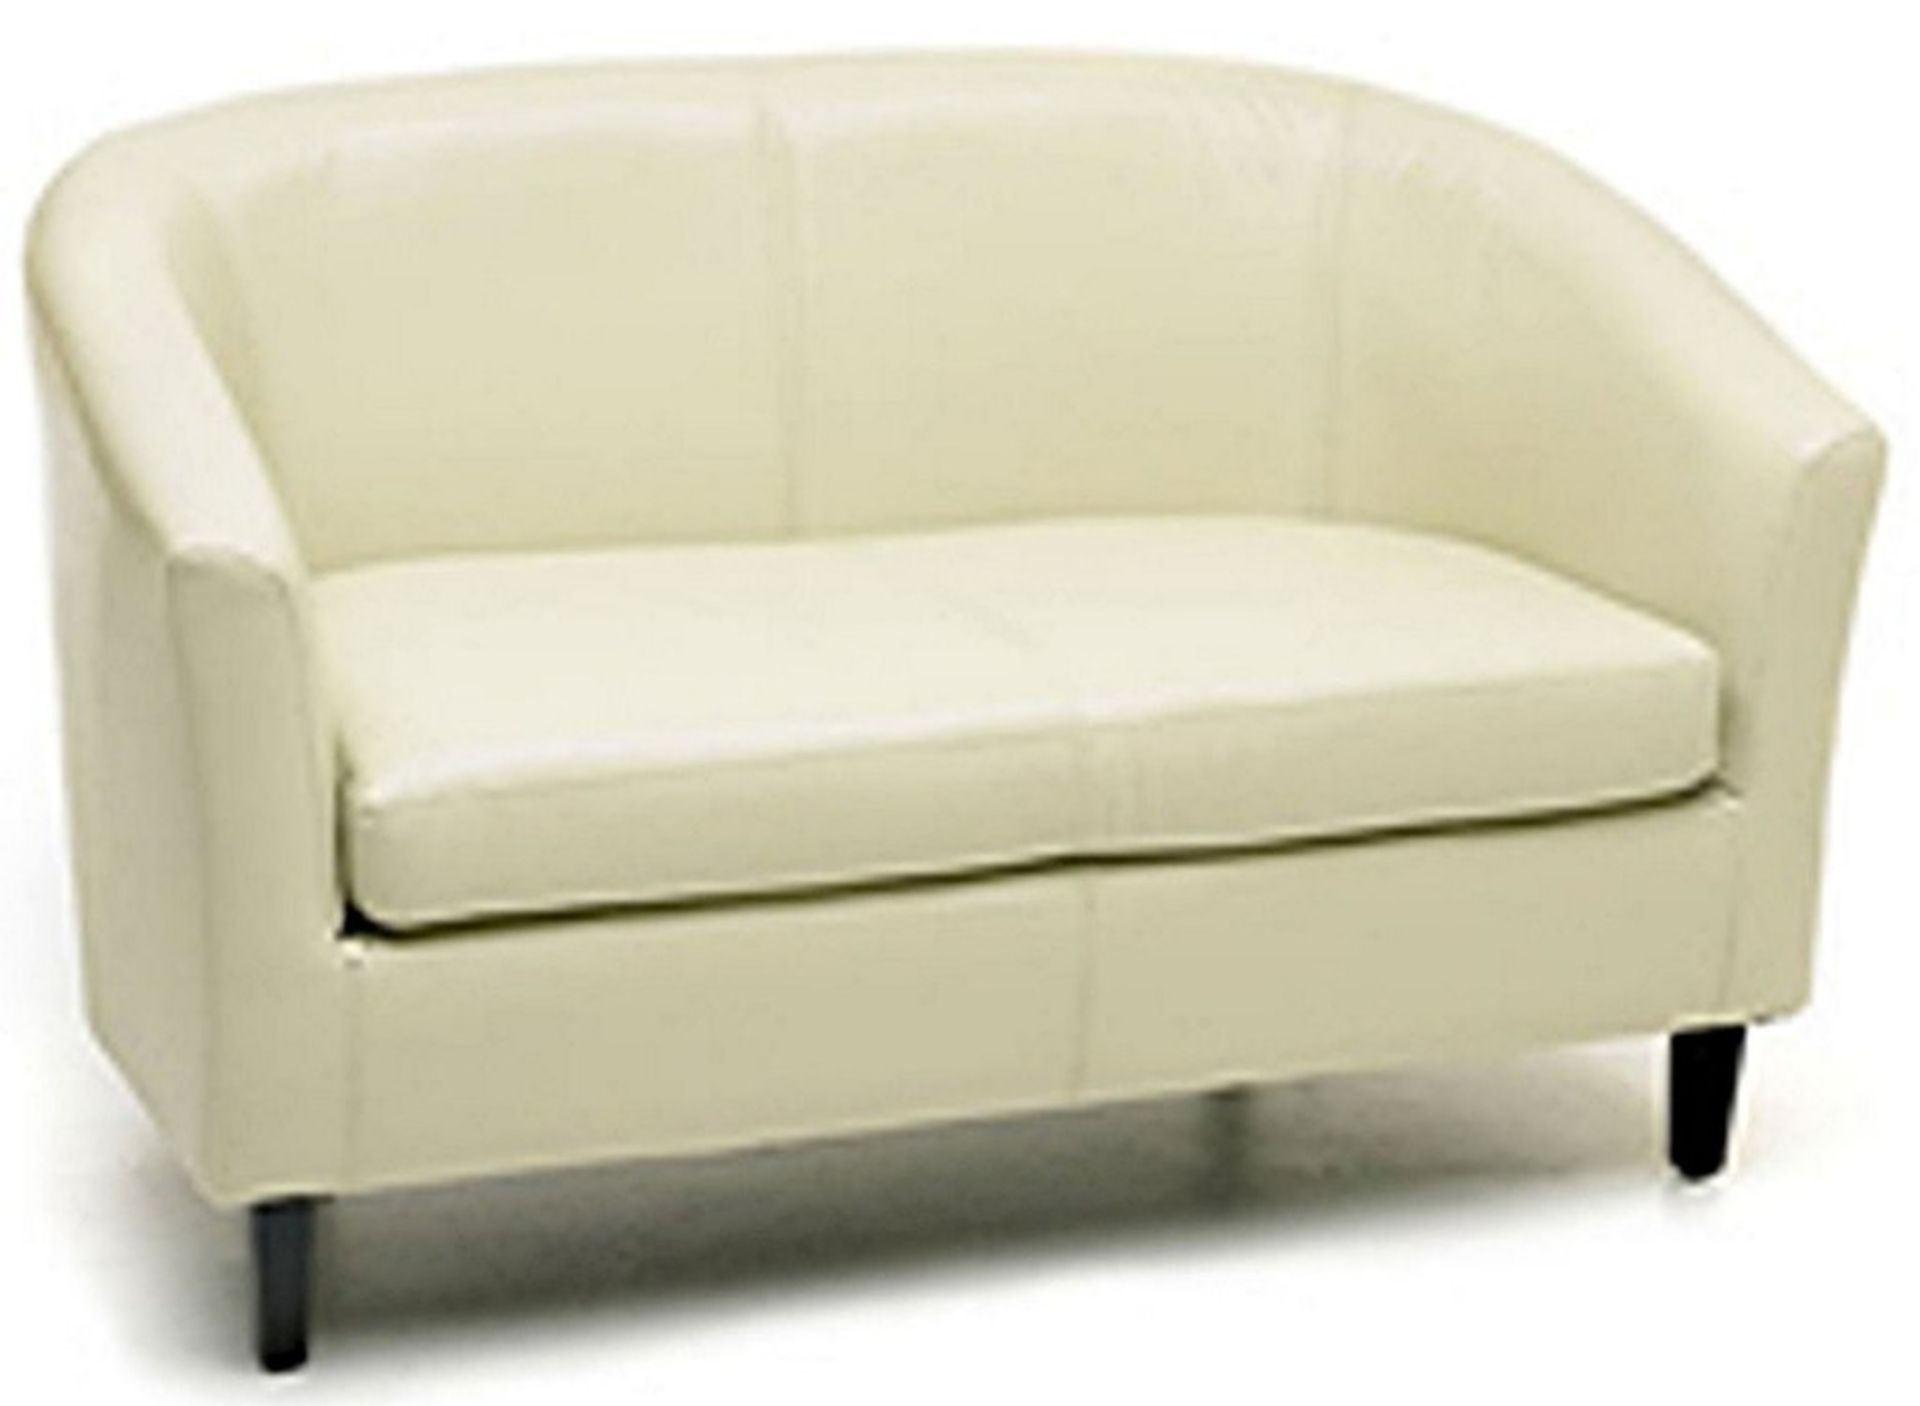 Brand new boxed direct from the manufacturers, Cream faux leather 2 seater tub sofa with dark brown